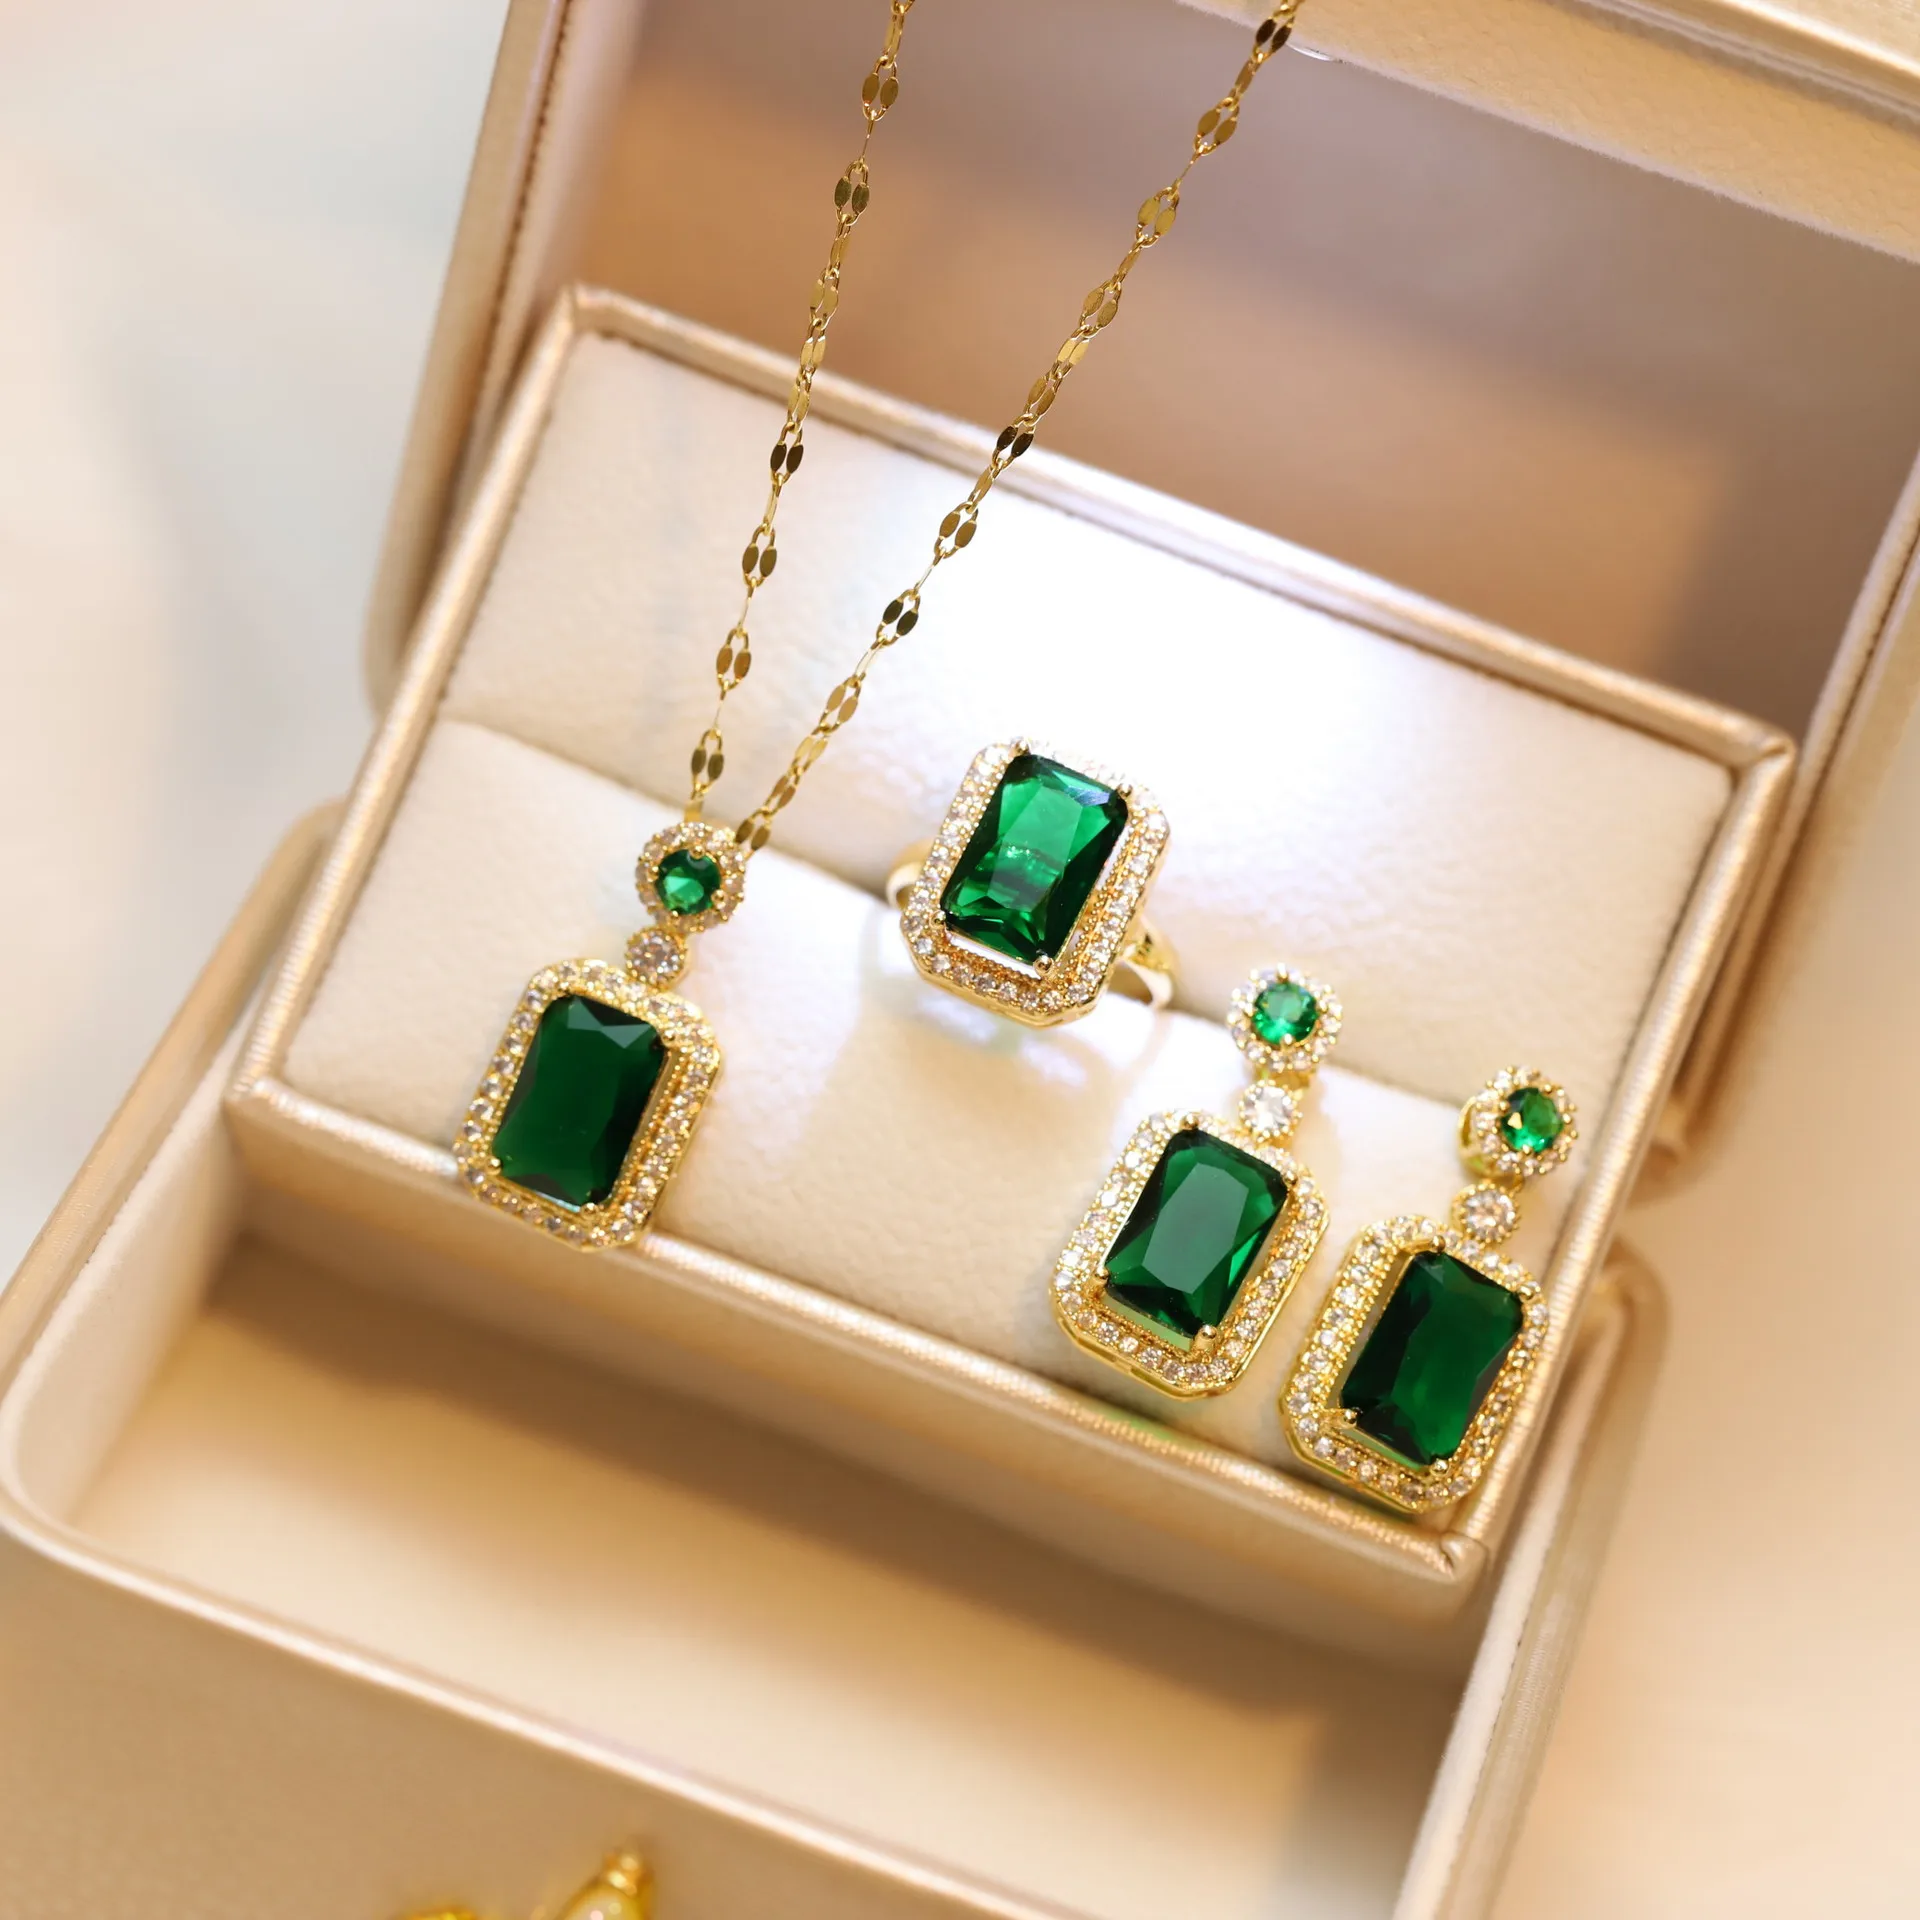 

3PCS/SET Fashion Stainless Steel Jewelry Set Women 18k Gold Emerald Zircon Pendant Necklace Rings And Earrings Set For Gift